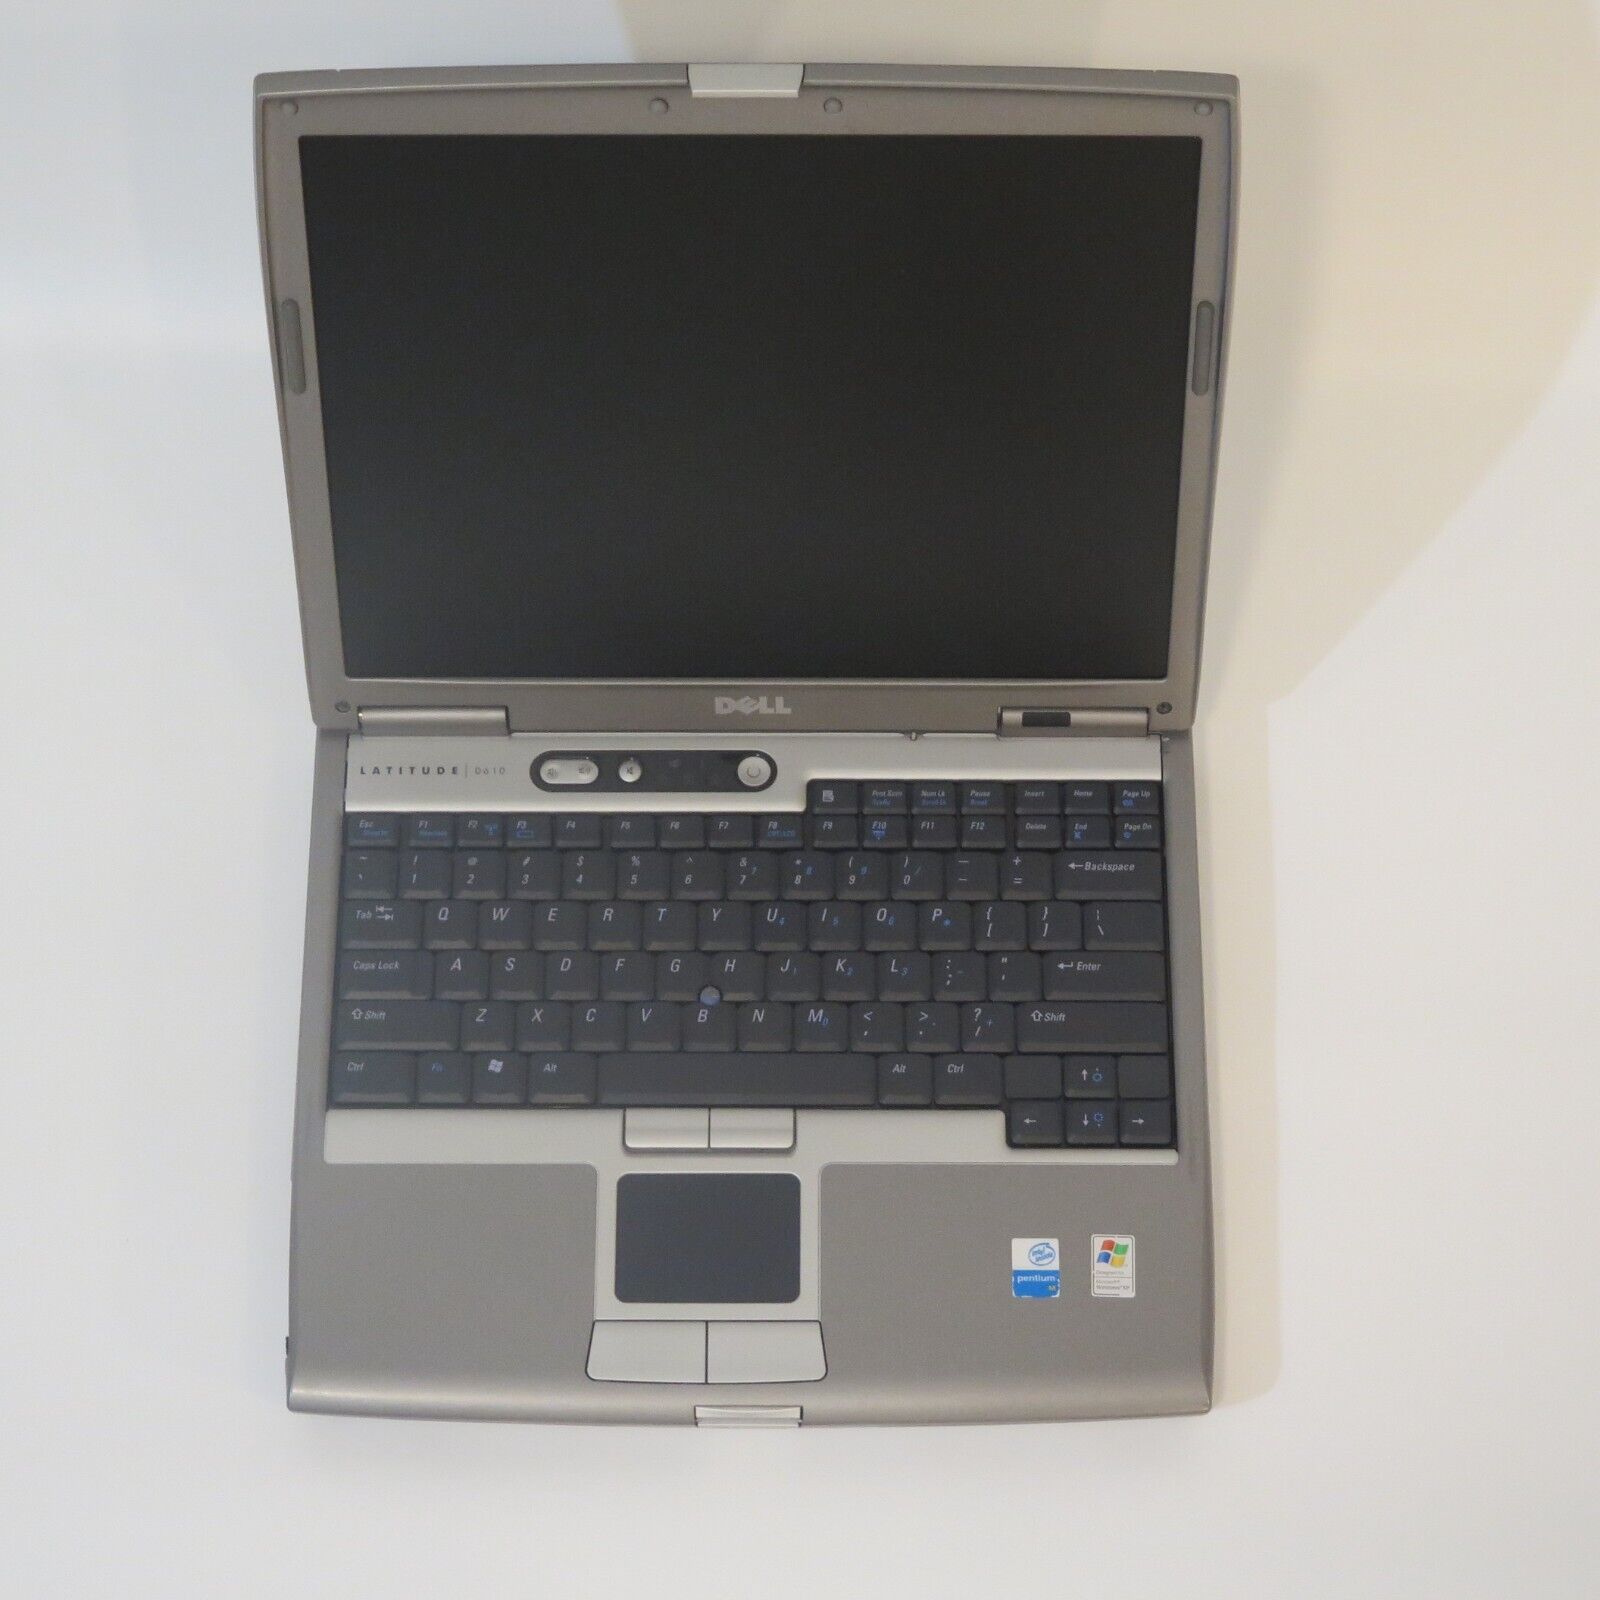 Beautiful Dell Latitude D610 laptop 1.73 GHz 20GB 512MB WinXPProf- Parallel port